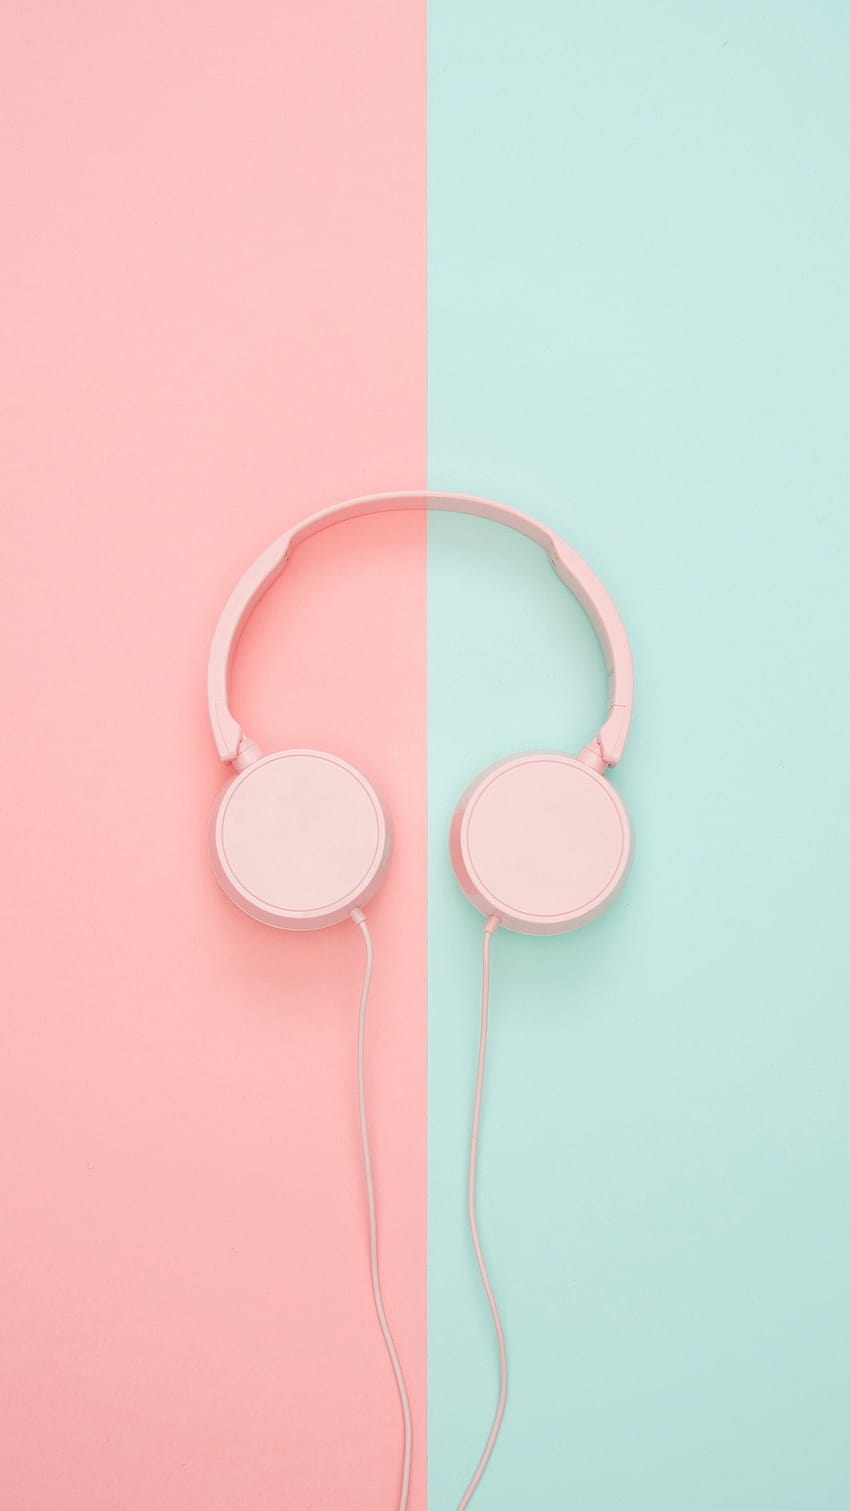 A pair of pink headphones on a pink and blue background - Pastel minimalist